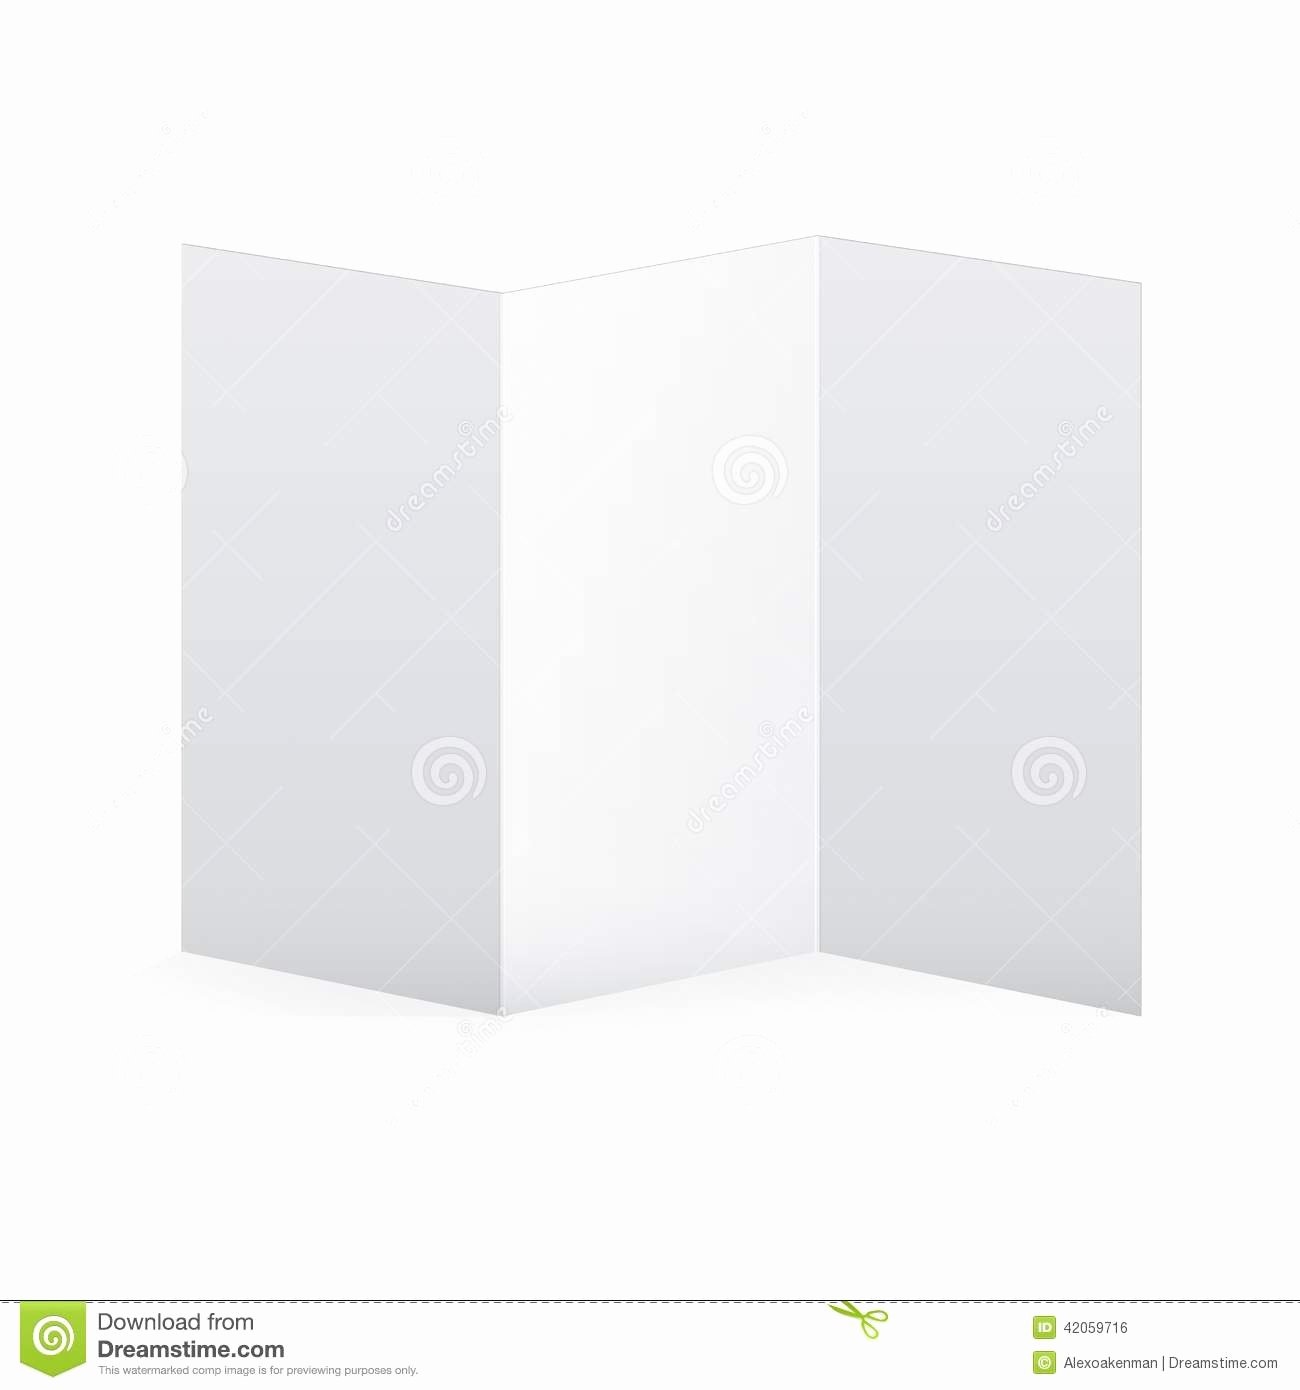 White Paper Template Indesign Inspirational Blank Vector White Tri Fold Brochure Template Stock